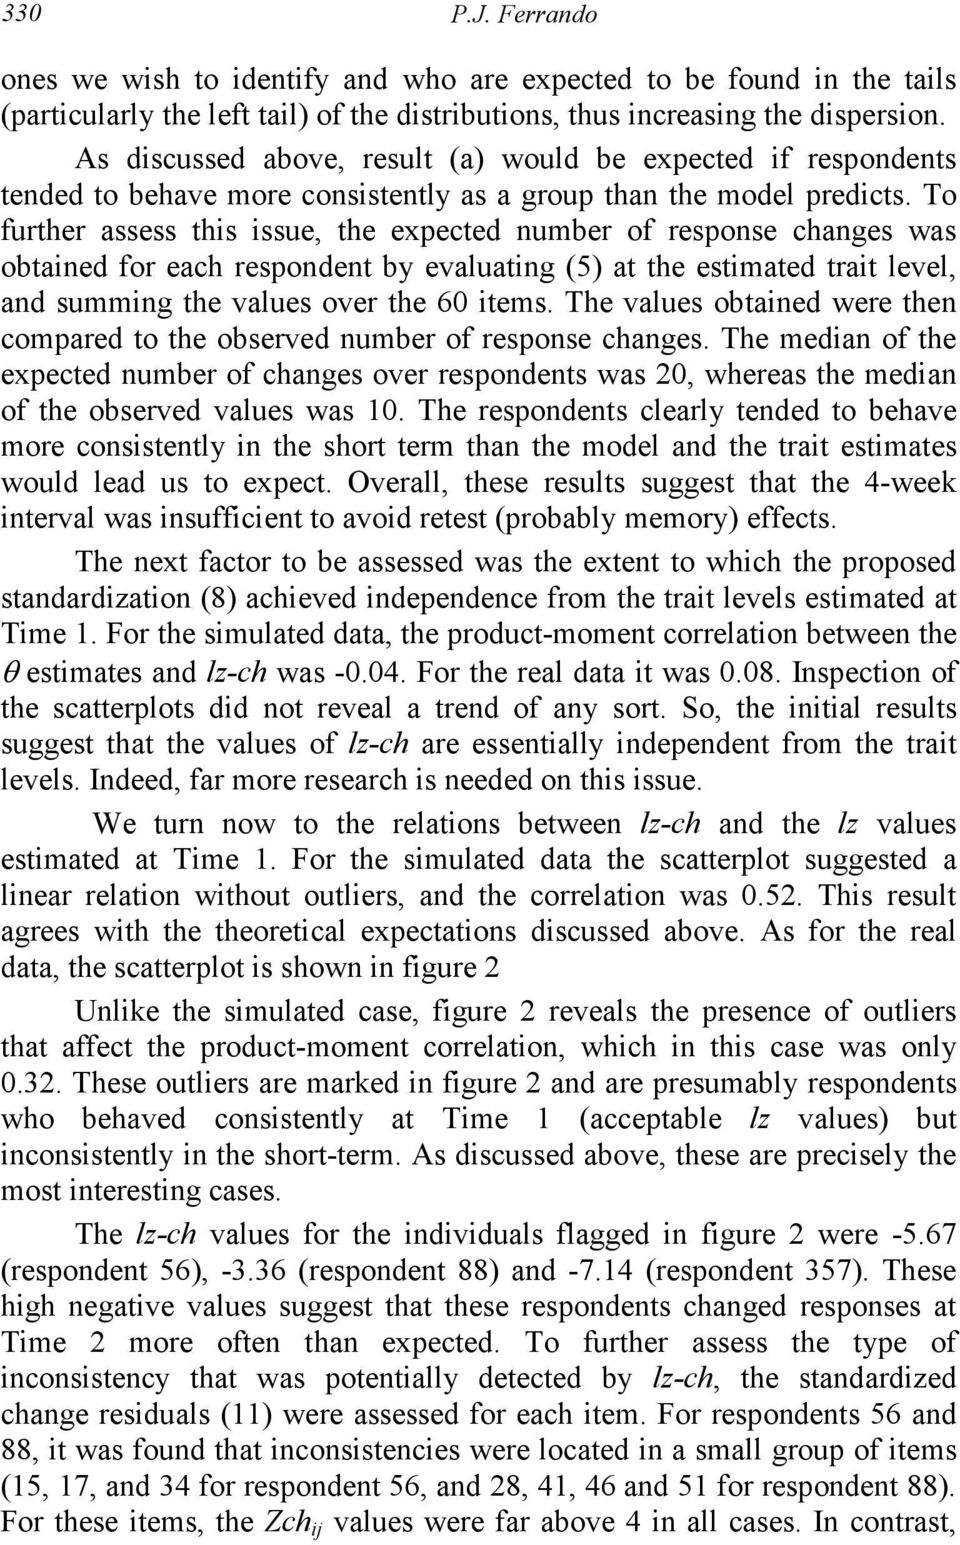 To further assess ths ssue, the expected number of response changes was obtaned for each respondent by evaluatng (5) at the estmated trat level, and summng the values over the 60 tems.